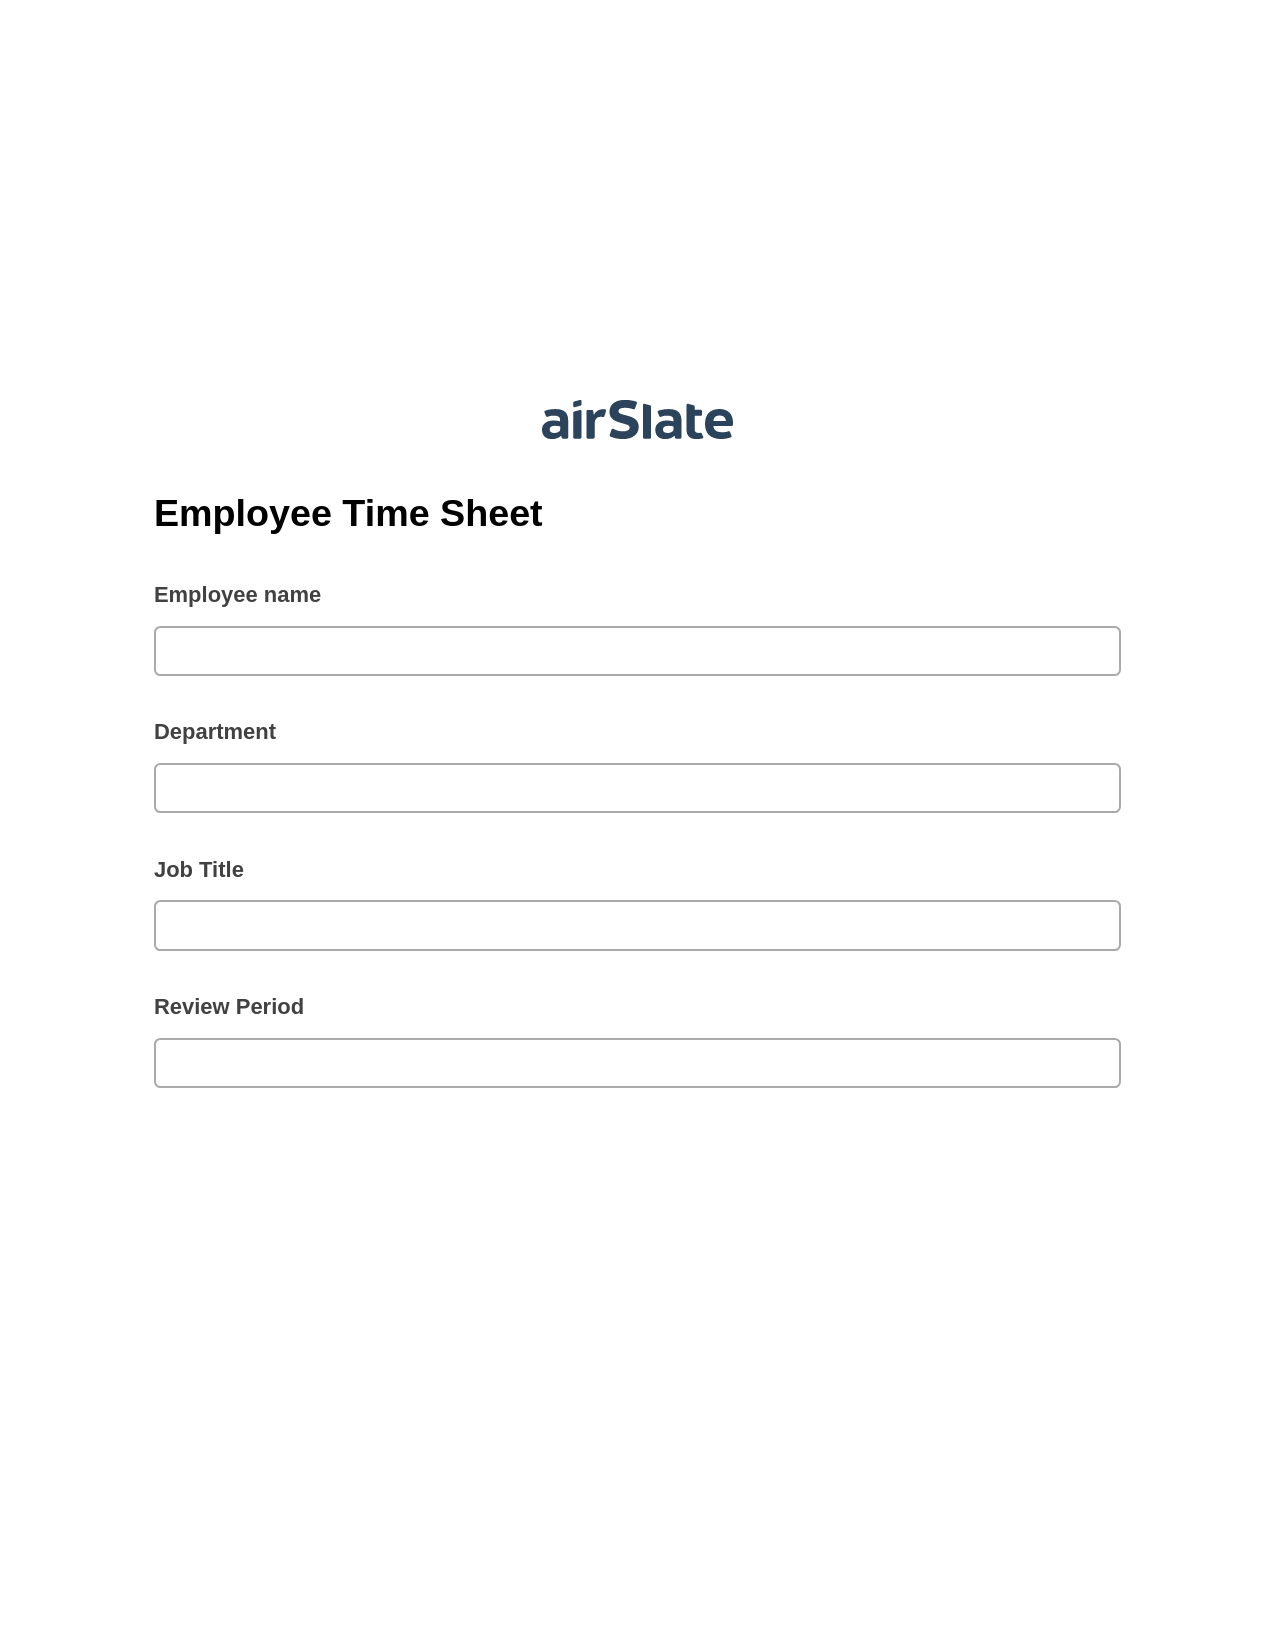 Employee Time Sheet Pre-fill from another Slate Bot, Create slate addon, Export to NetSuite Bot